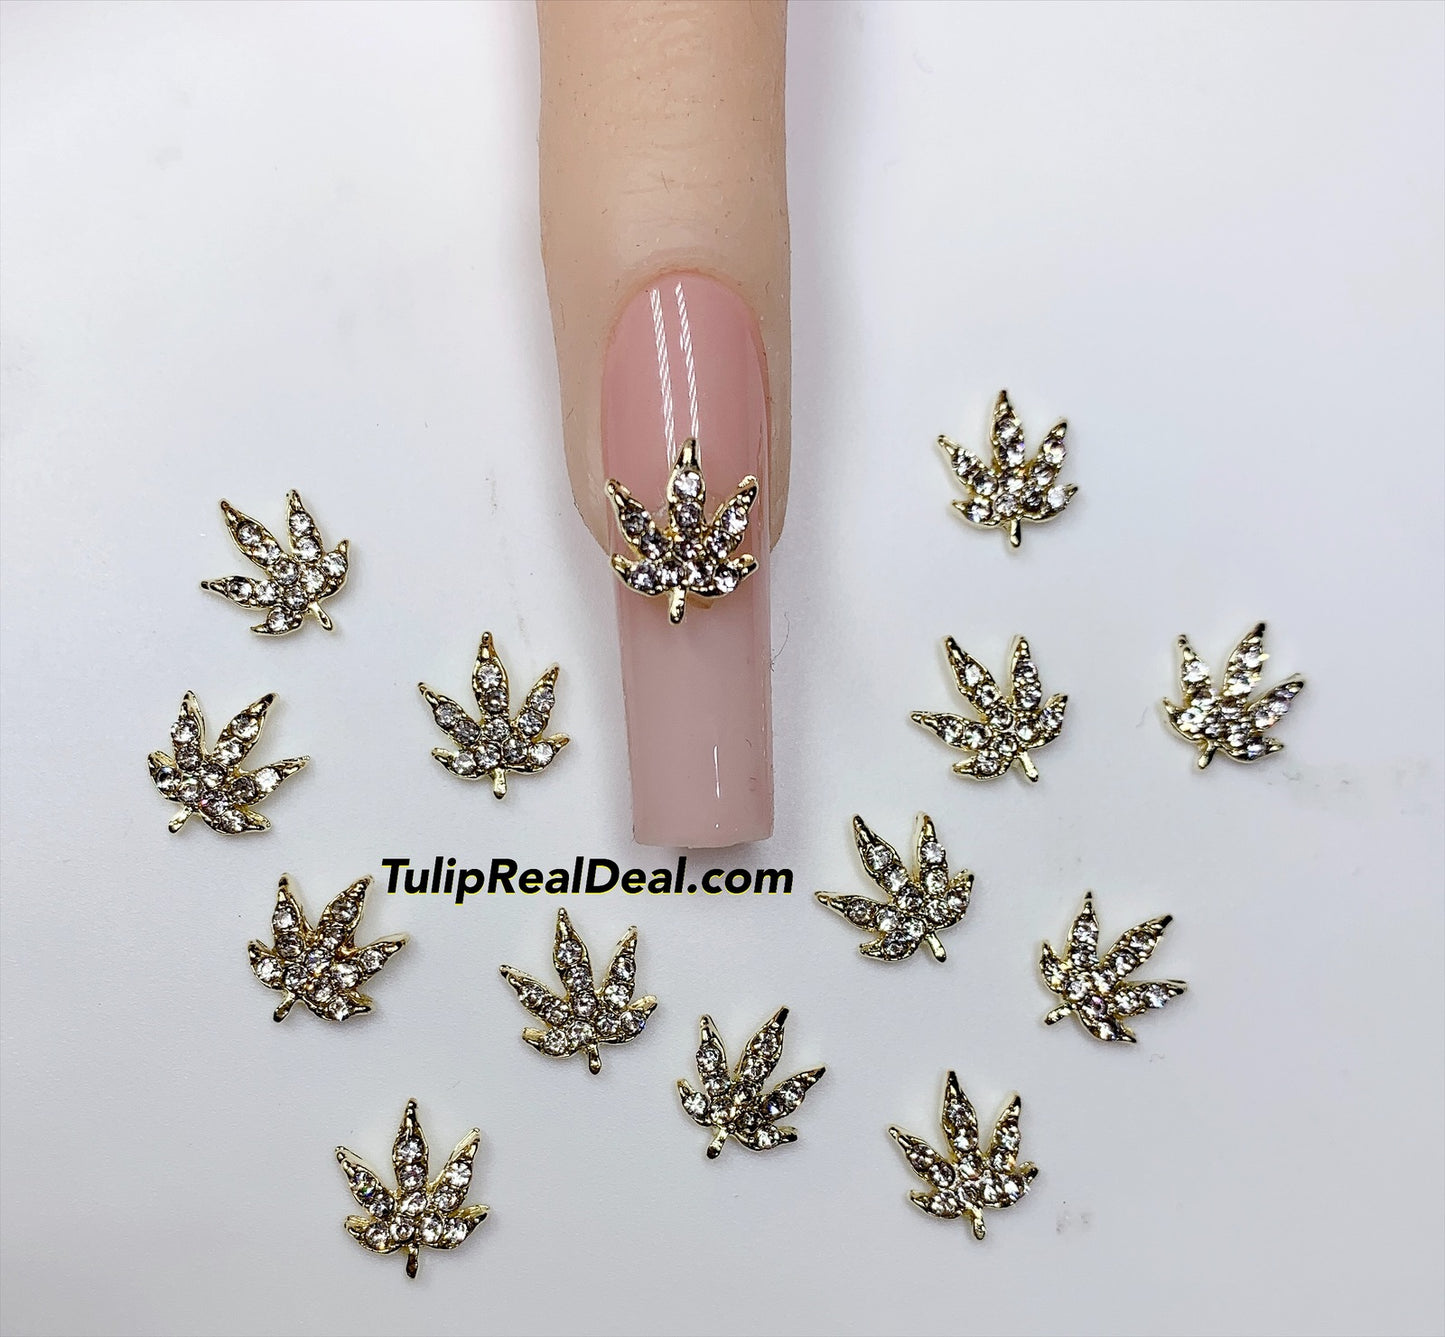 Clear Bling Weed Fall leaves charms 10pcs